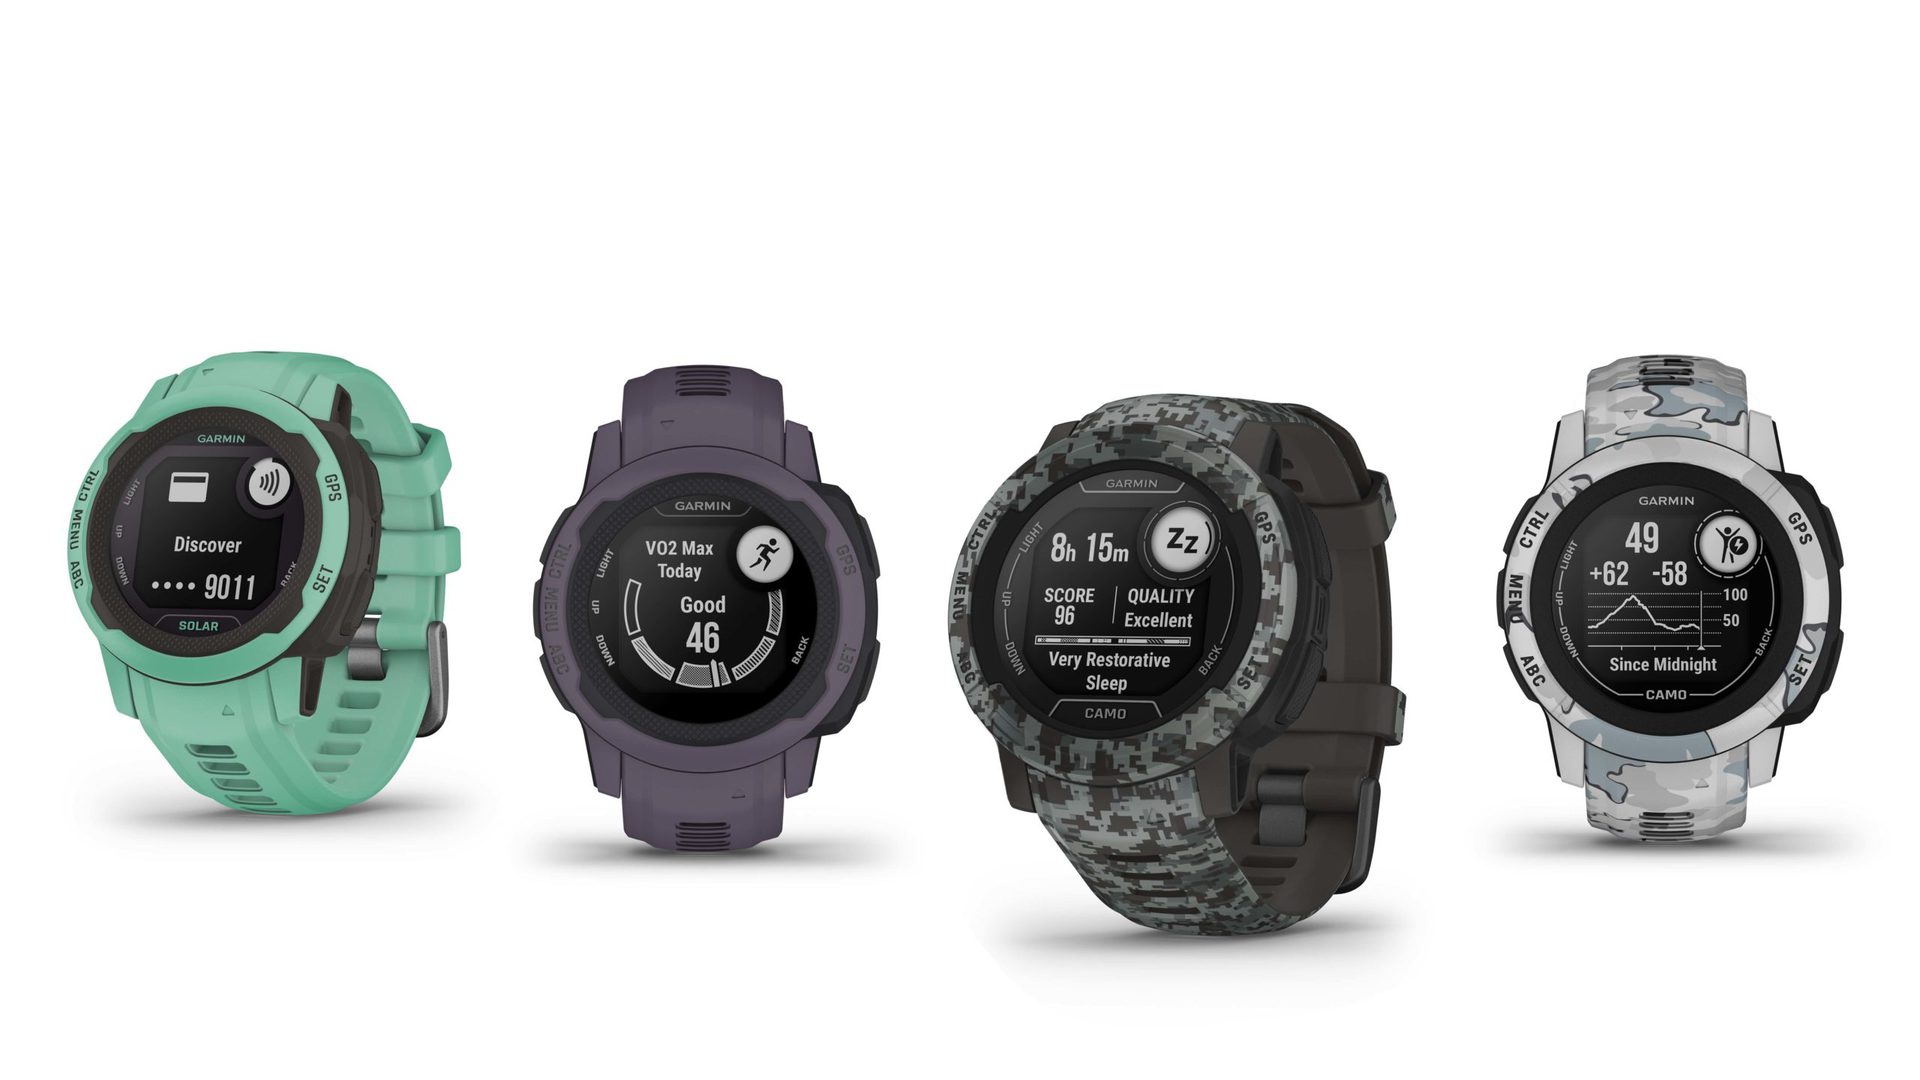 A variety of devices from the Garmin Instinct 2 series display new and updated features including Vo2 Max, Garmin Pay, Sleep Score, and updates to Body Battery.